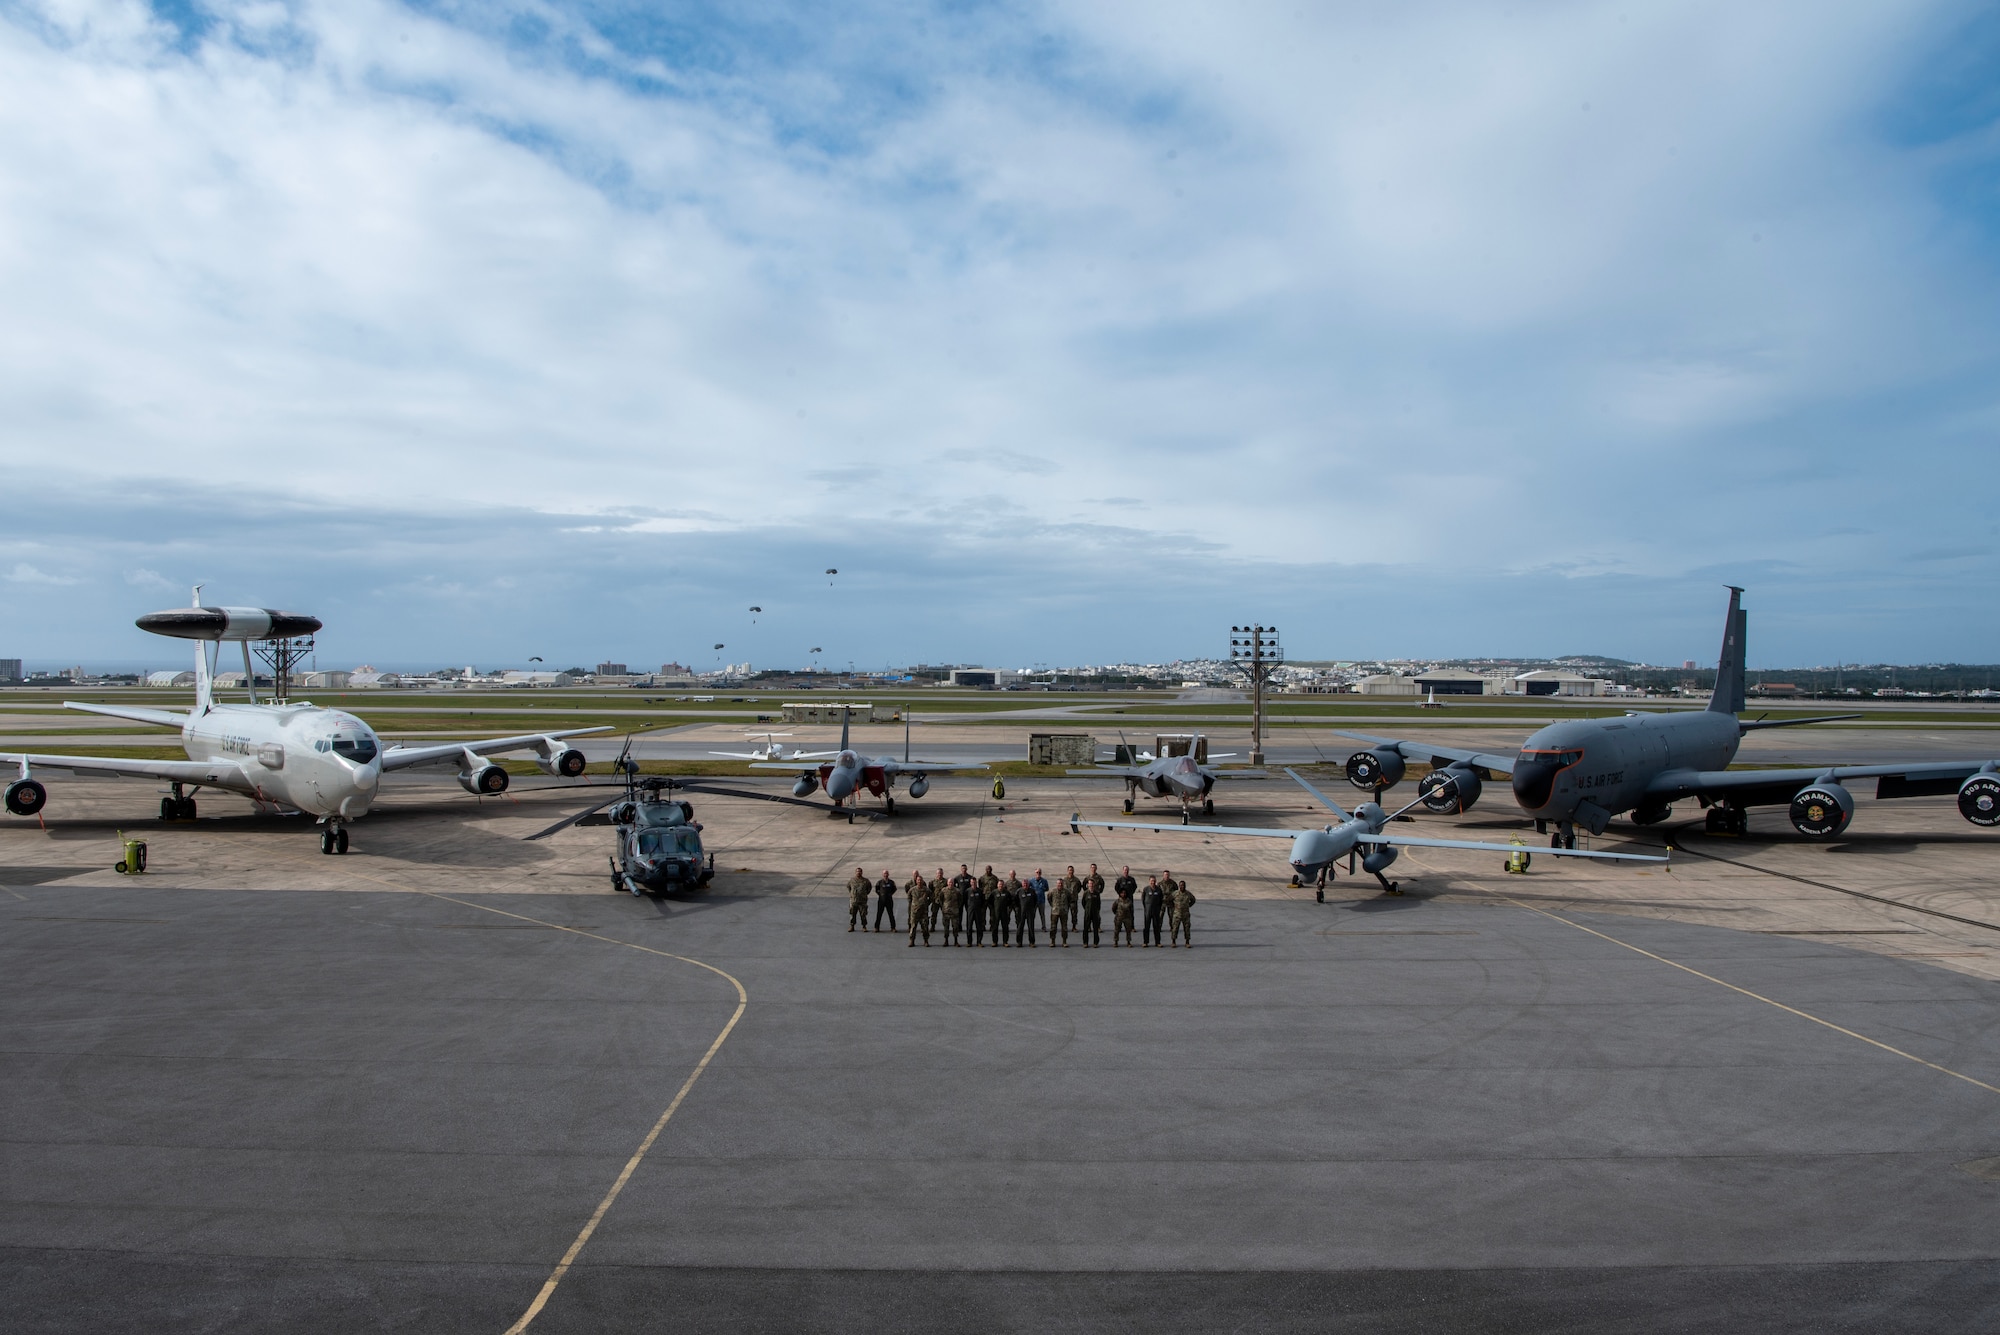 U.S. Air Force 5th Air Force, 18th Wing, 374th Air Wing and 35th Fighter Wing leadership pose for a photo.